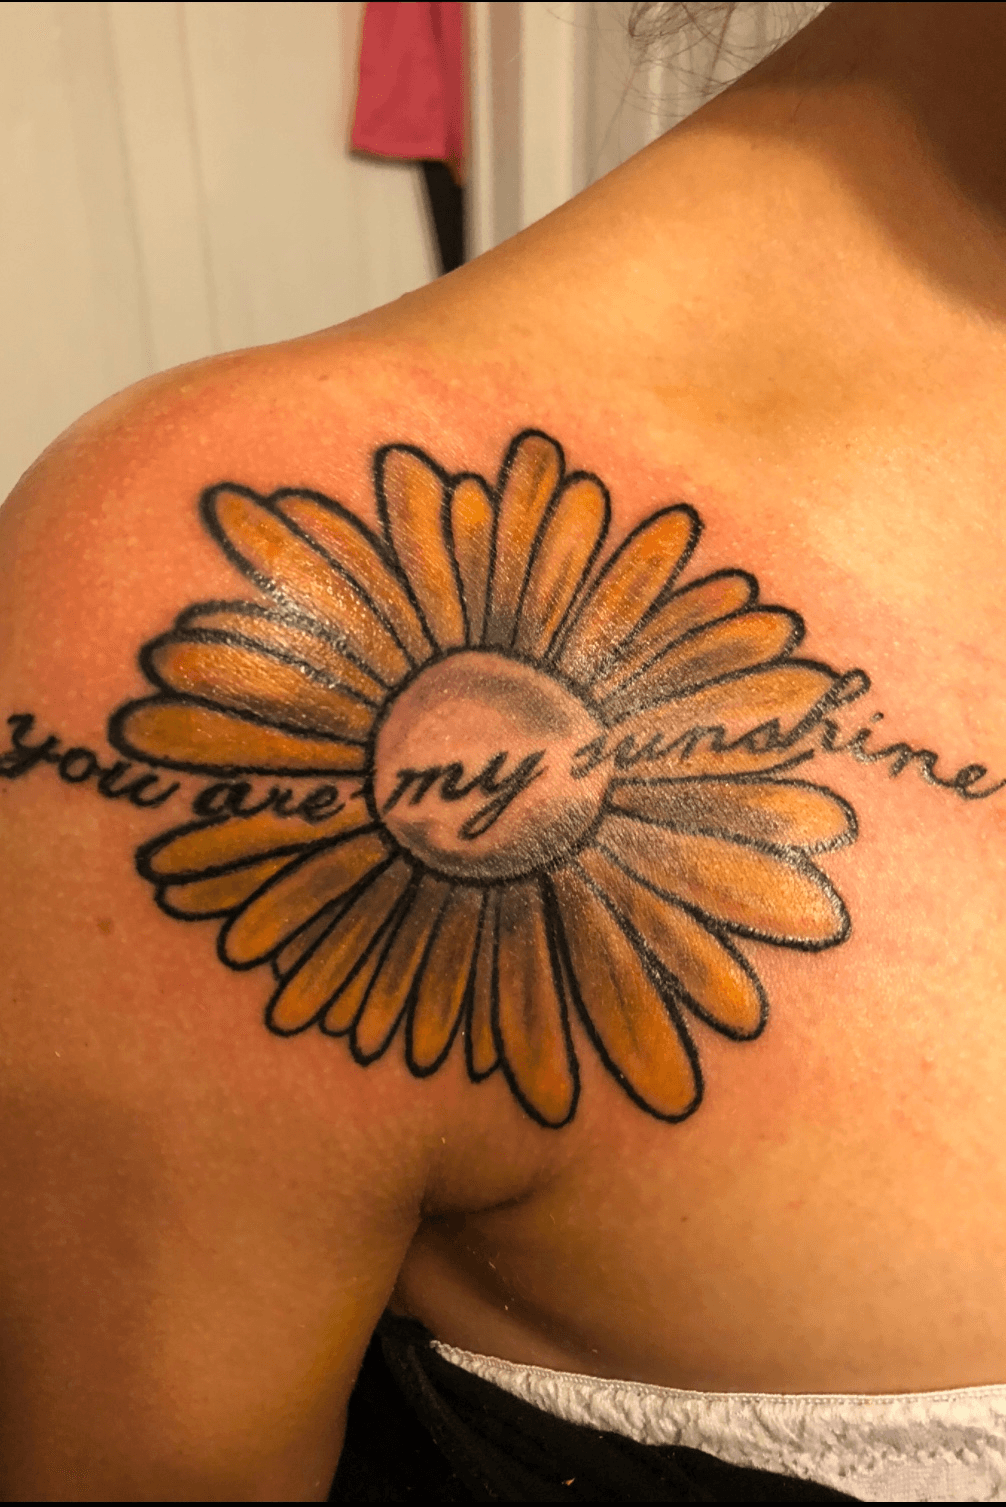 You are my sunshine  Best couple tattoos Friend tattoos Couple tattoos  unique